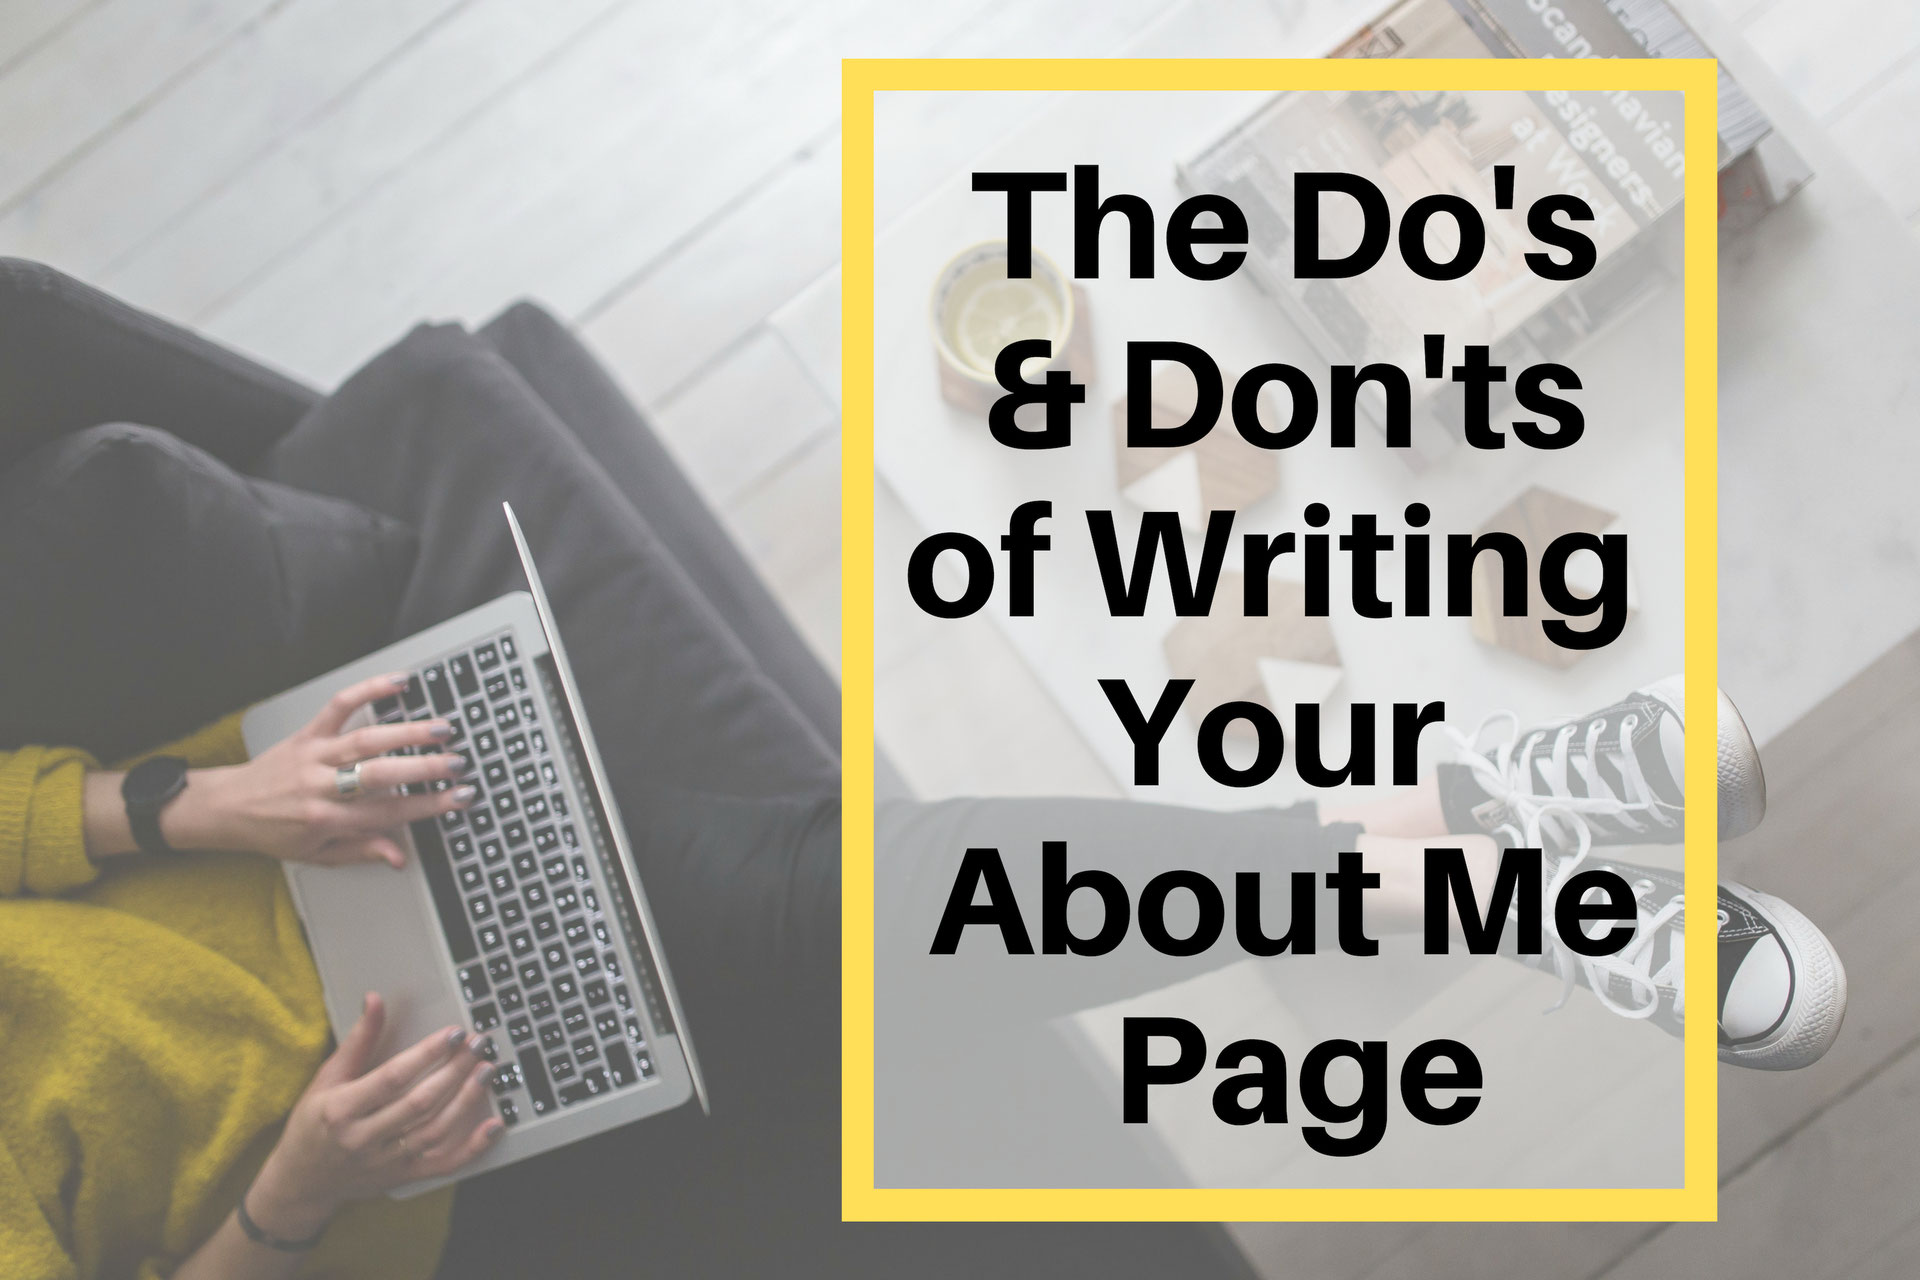 How to Write the Best About Me Page Possible